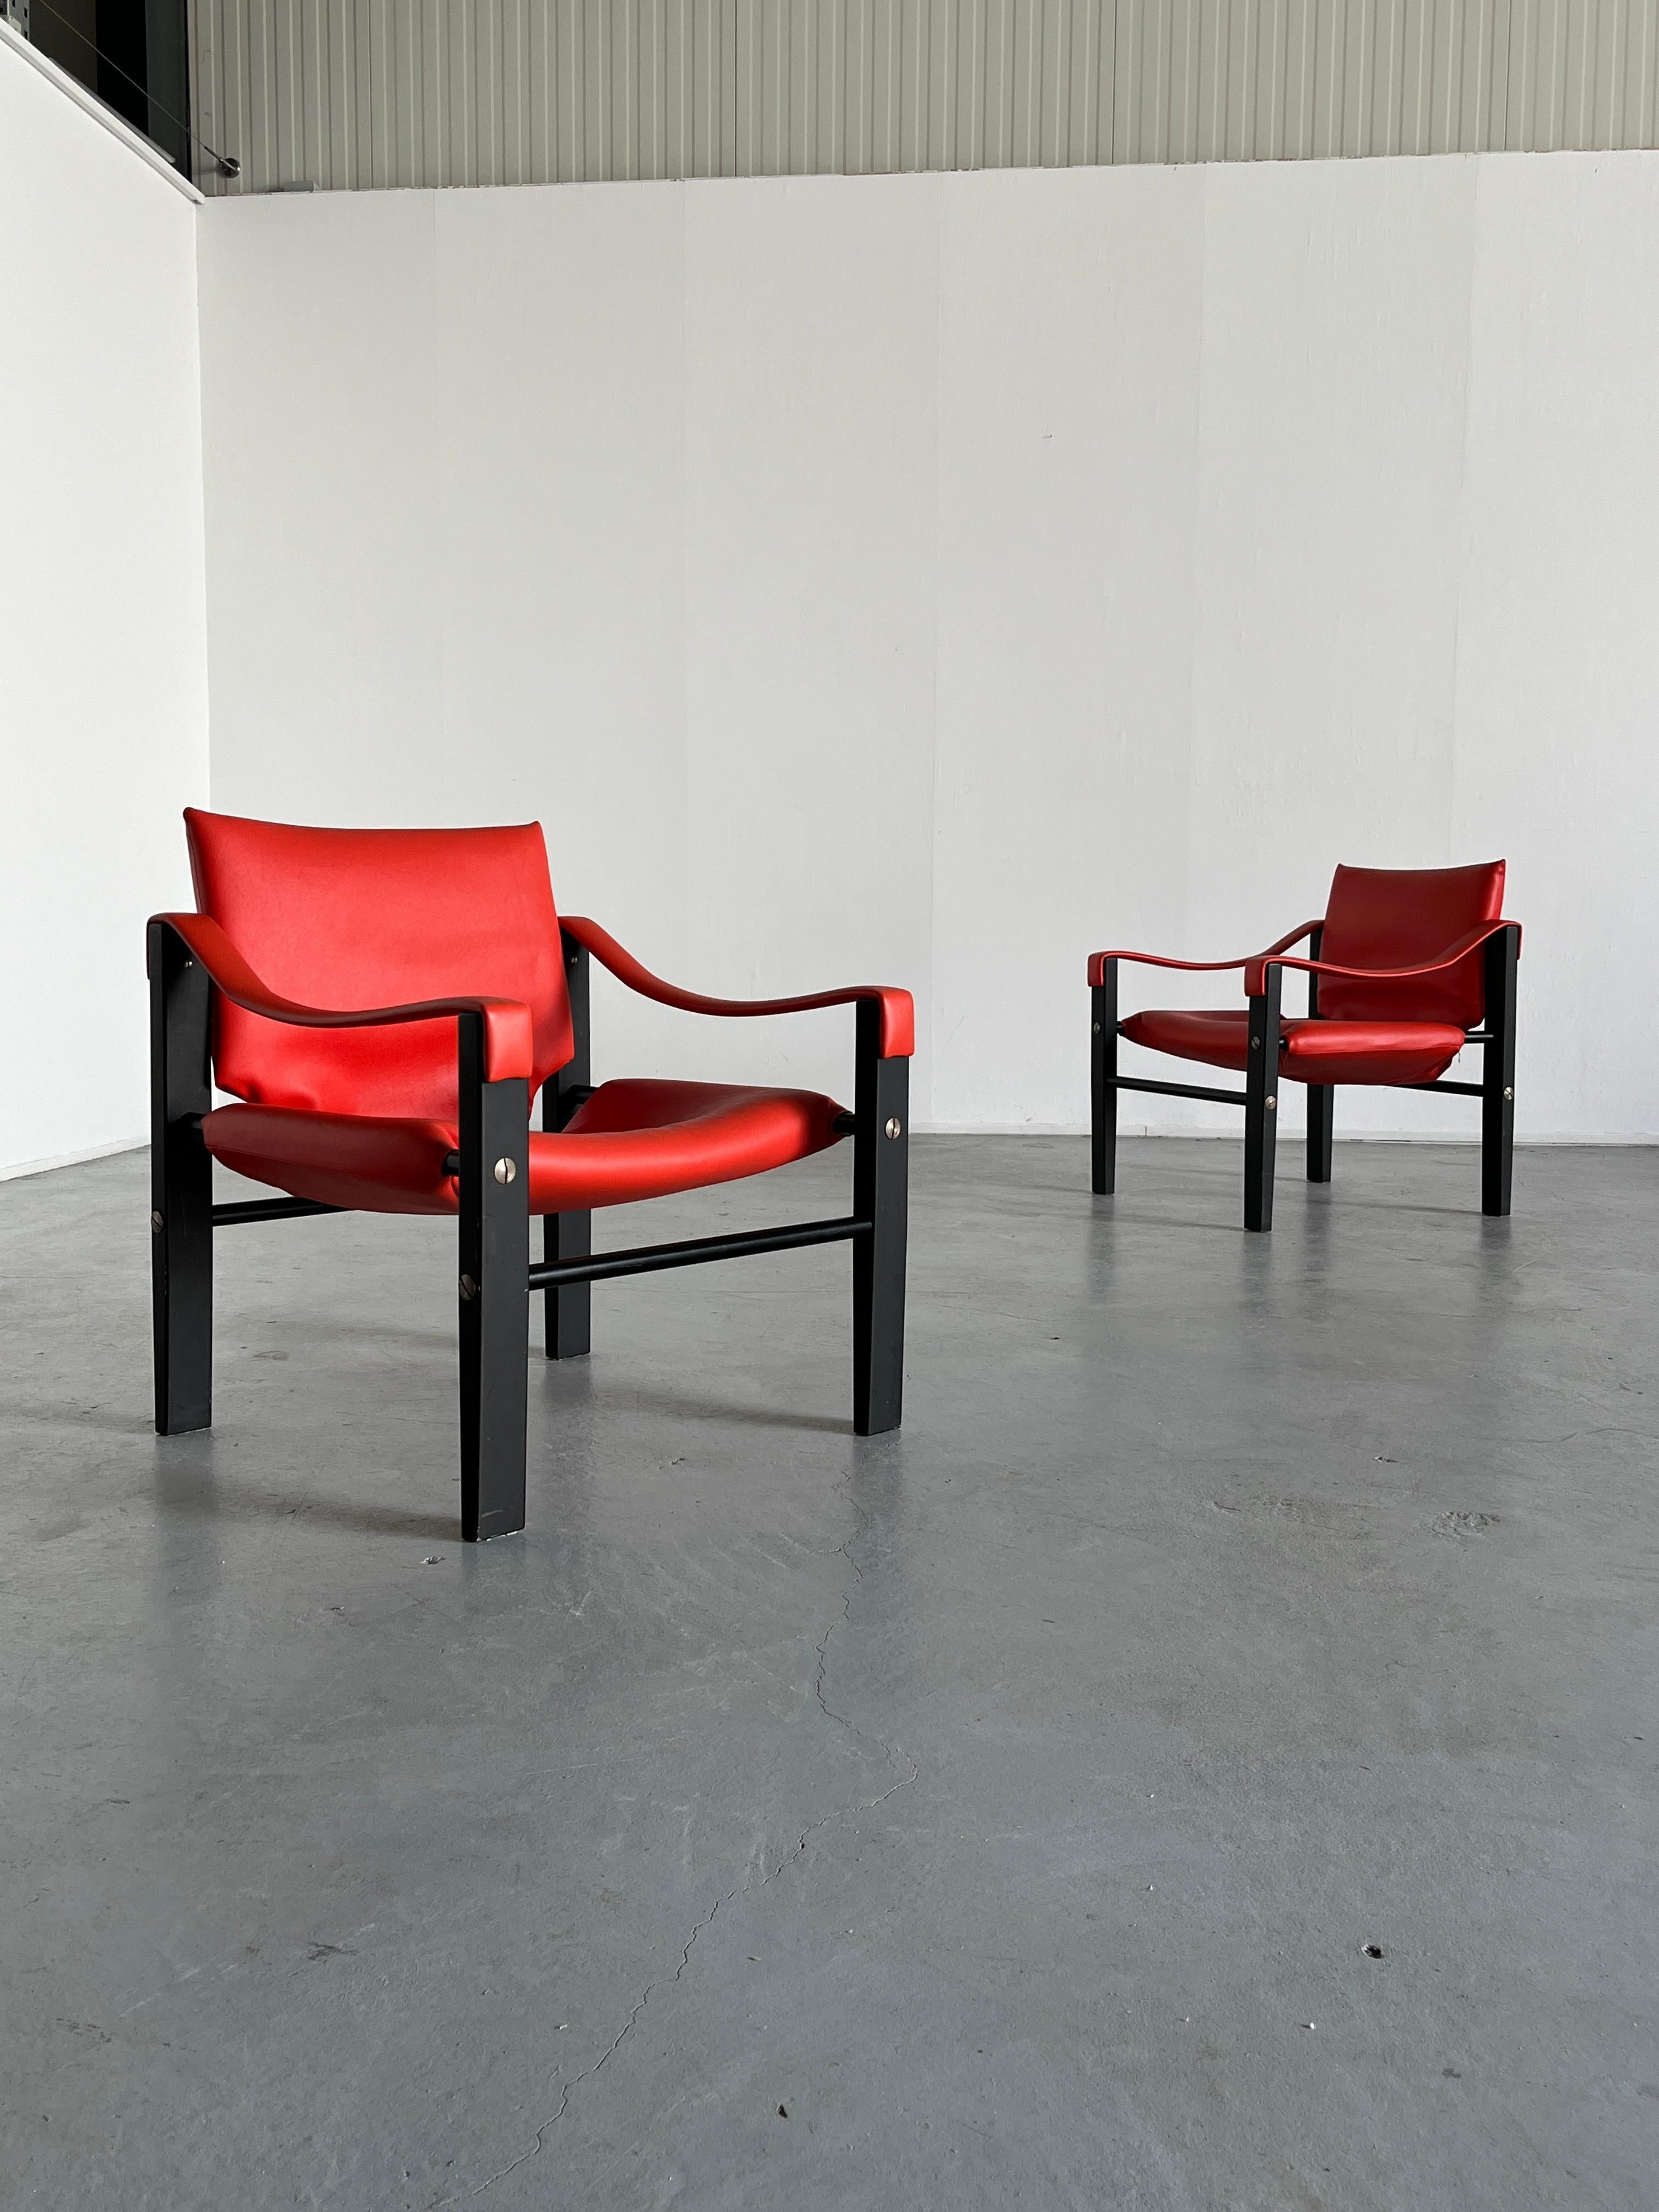 Rare edition vintage Safari chairs designed by Maurice Burke for Arkana Furniture, wearing their original red faux leather or vinyl with a coloured teak frame, tubular metal runners, and steel screw details. 1960s production, both original and